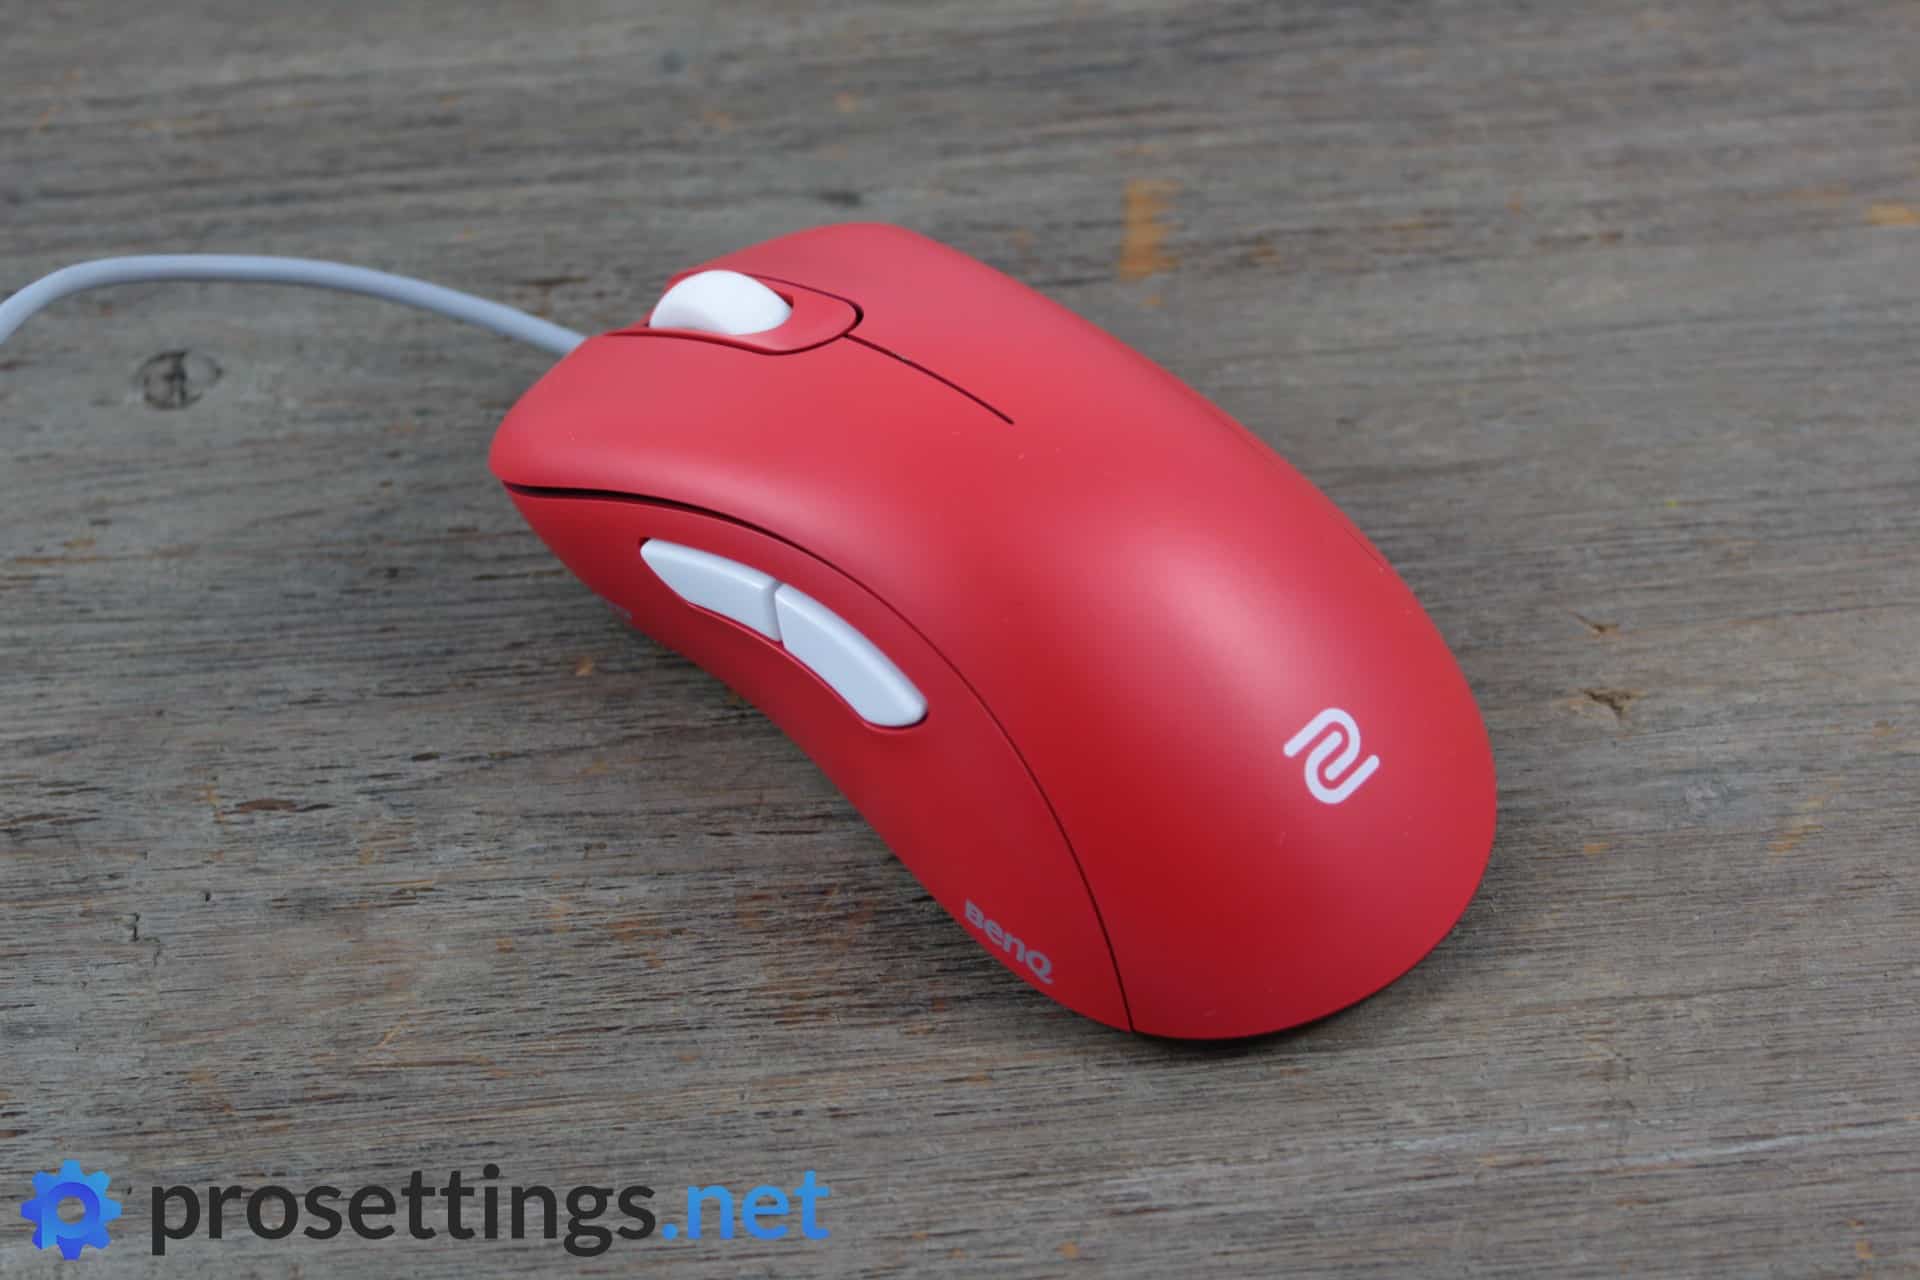 Zowie EC2 Tyloo Mouse Review